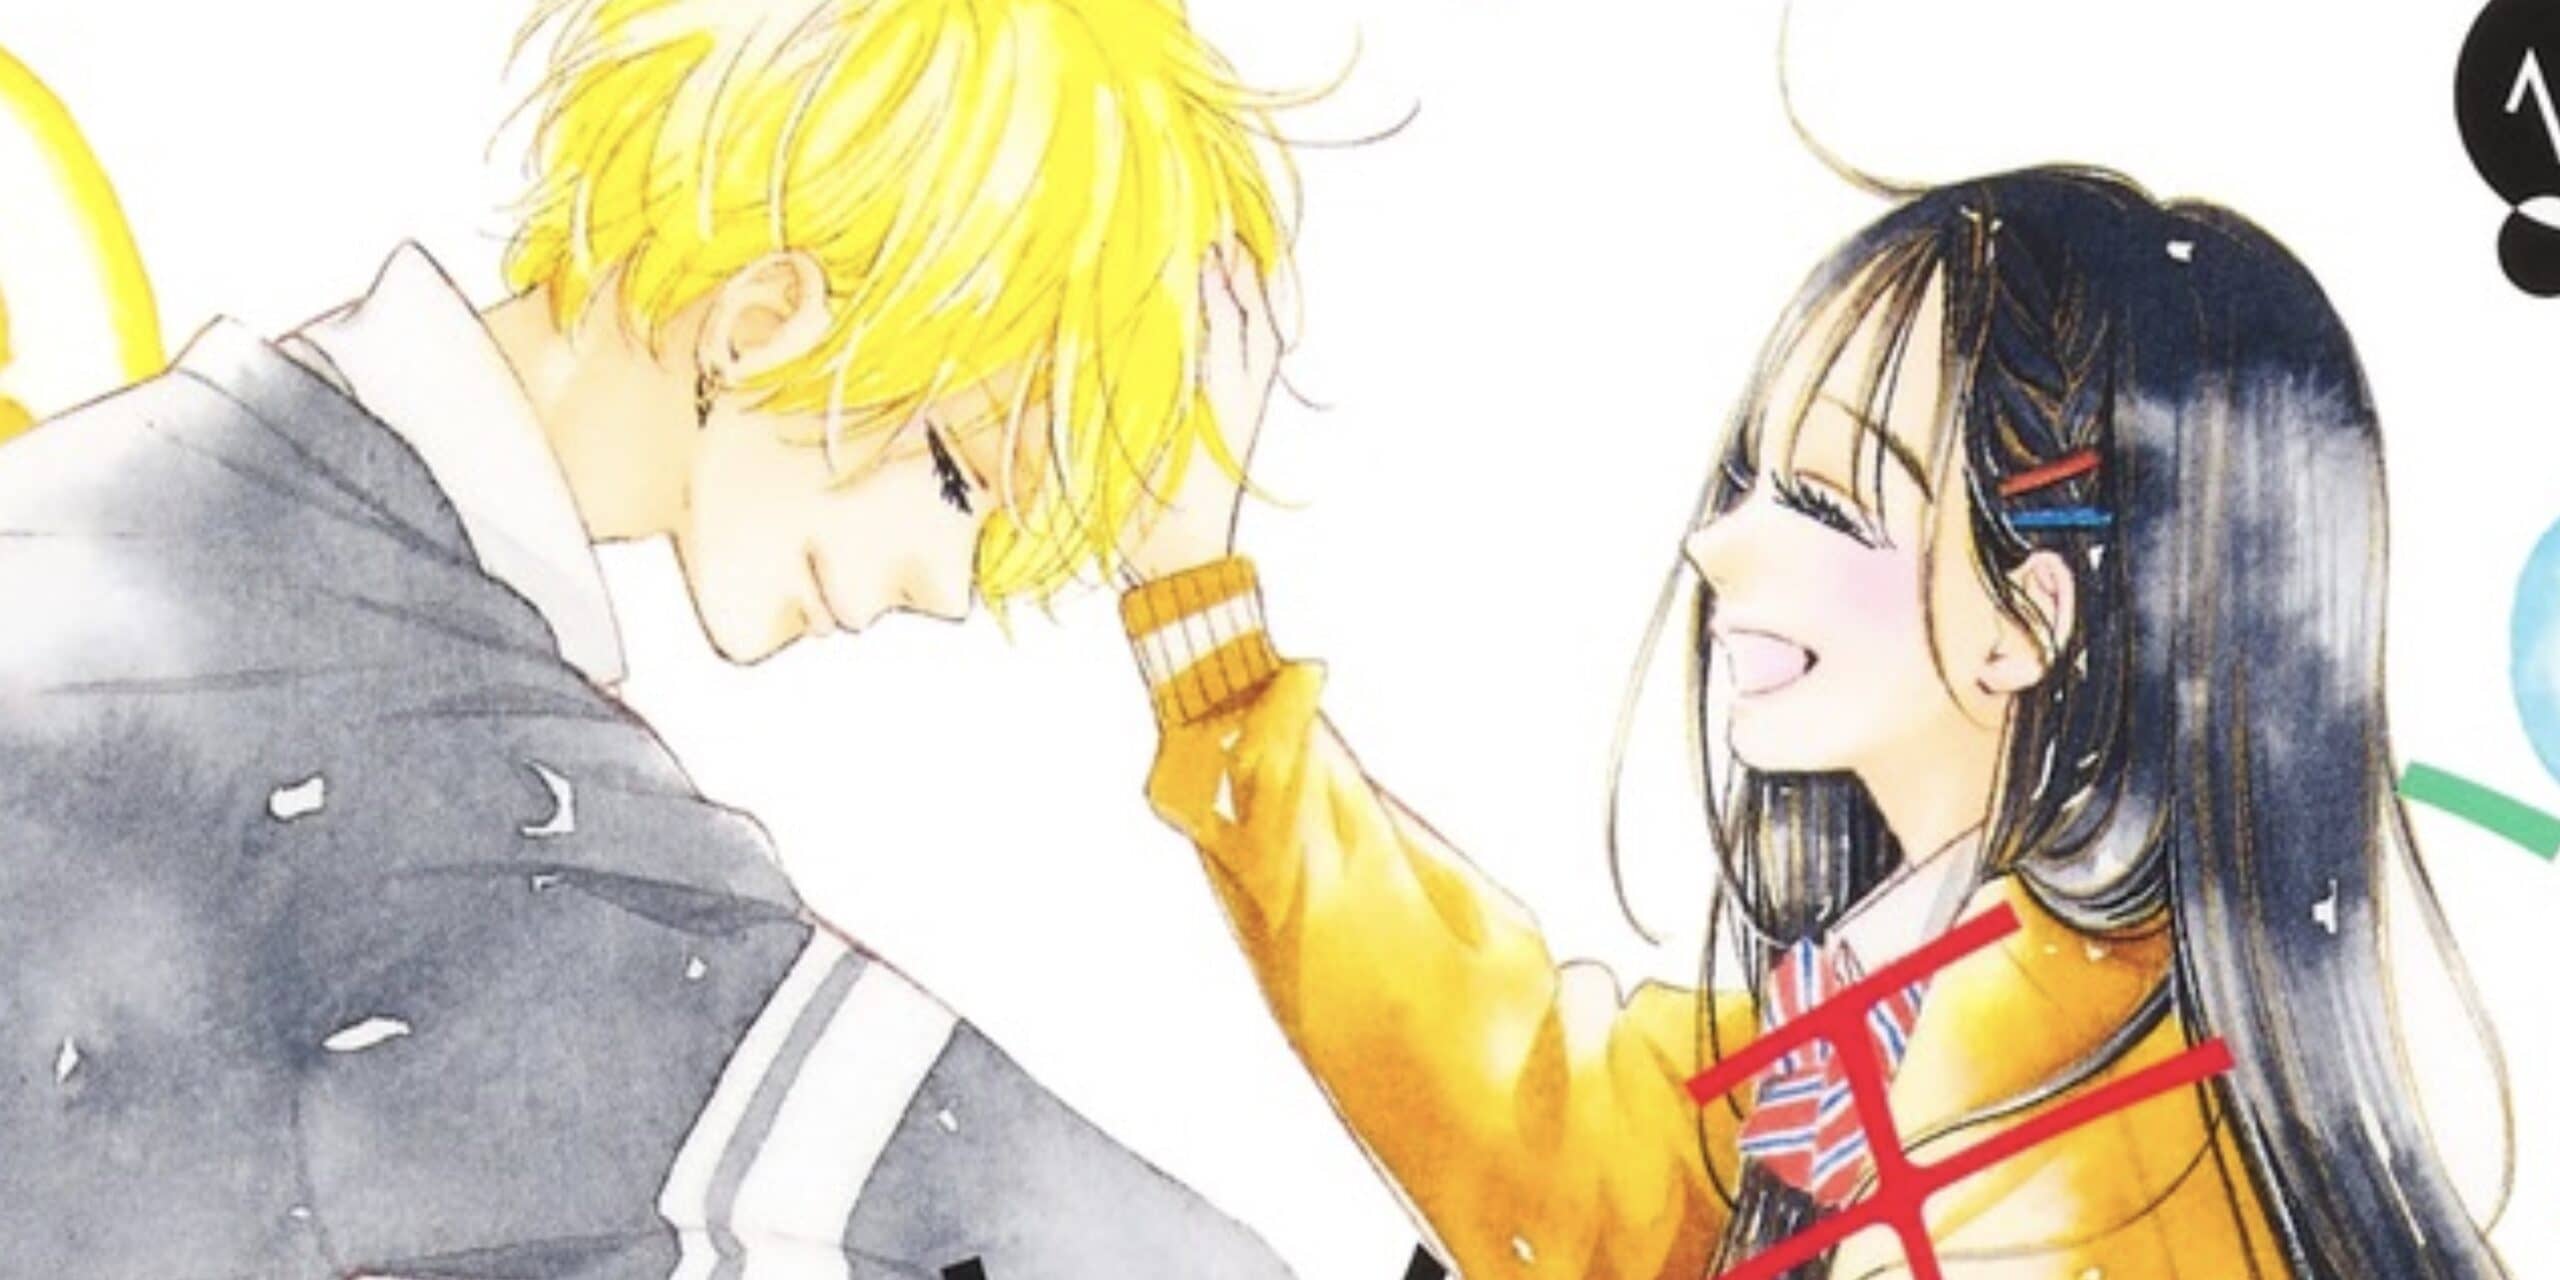 Top 25 Most-Wanted Manga for Japanese Fans to Be Animated!